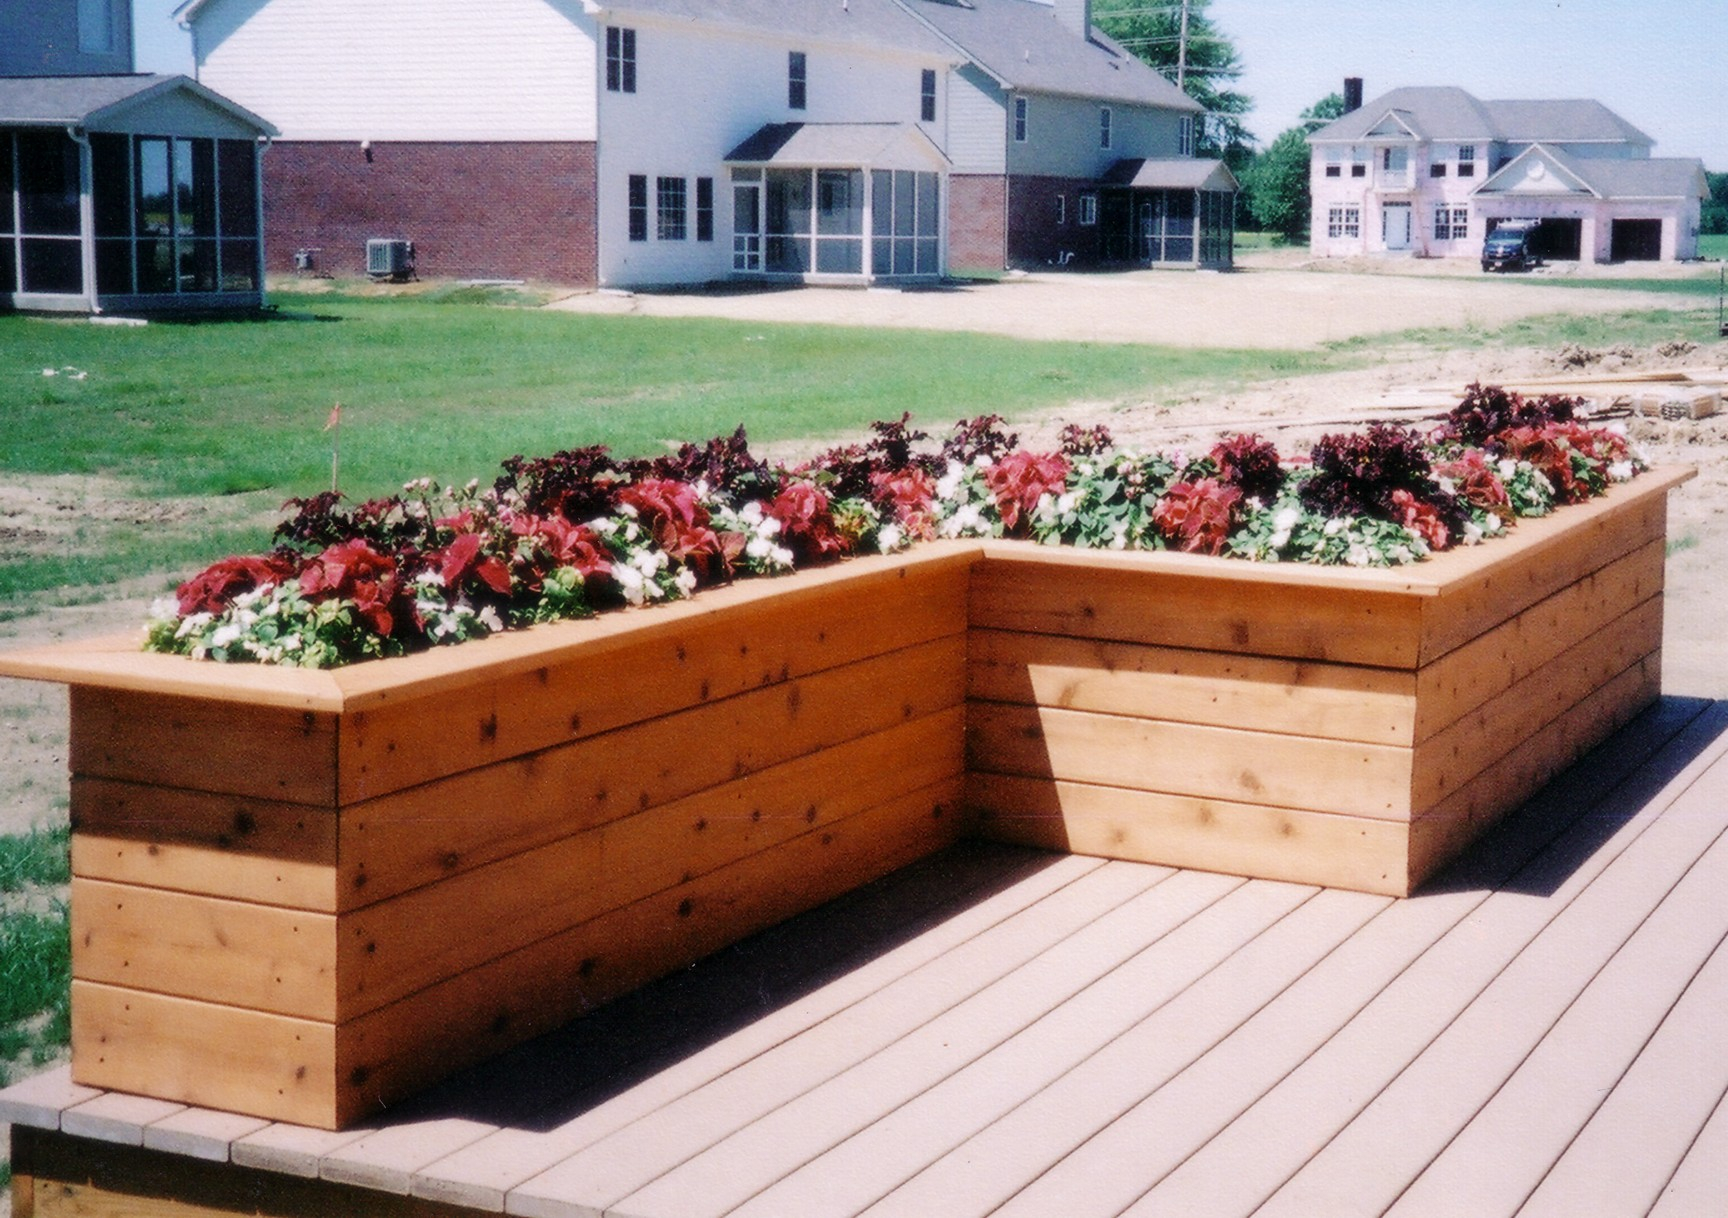 Deck Designs Benches Planters Planter Box Long Tierra Este 14013 intended for size 1728 X 1218